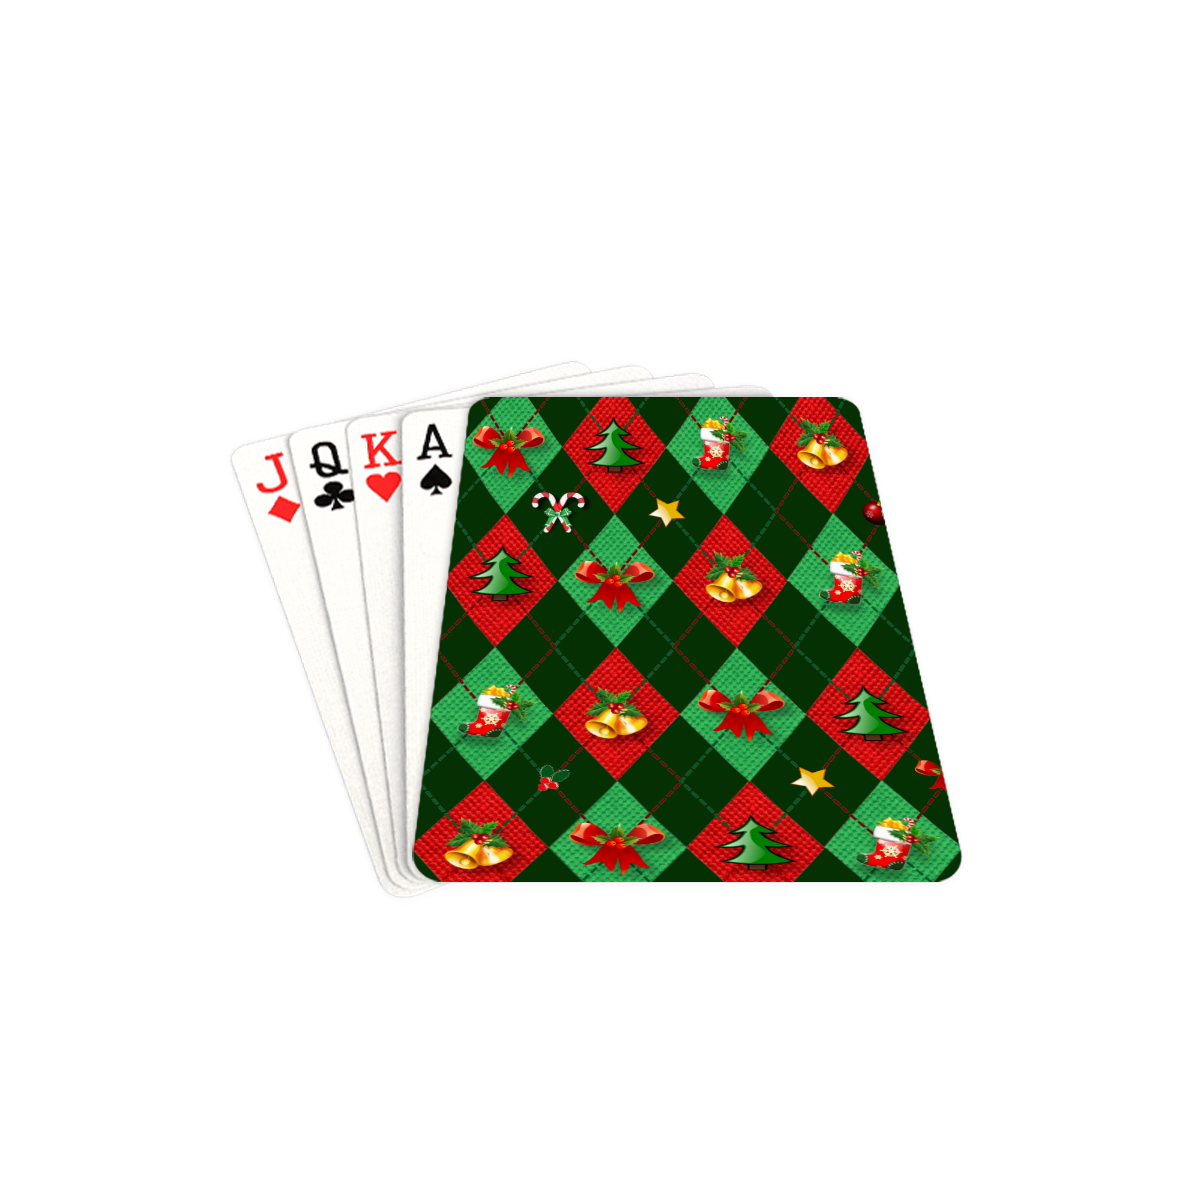 Christmas Argyle Ugly Sweater Pattern on Green Playing Cards 2.5"x3.5"